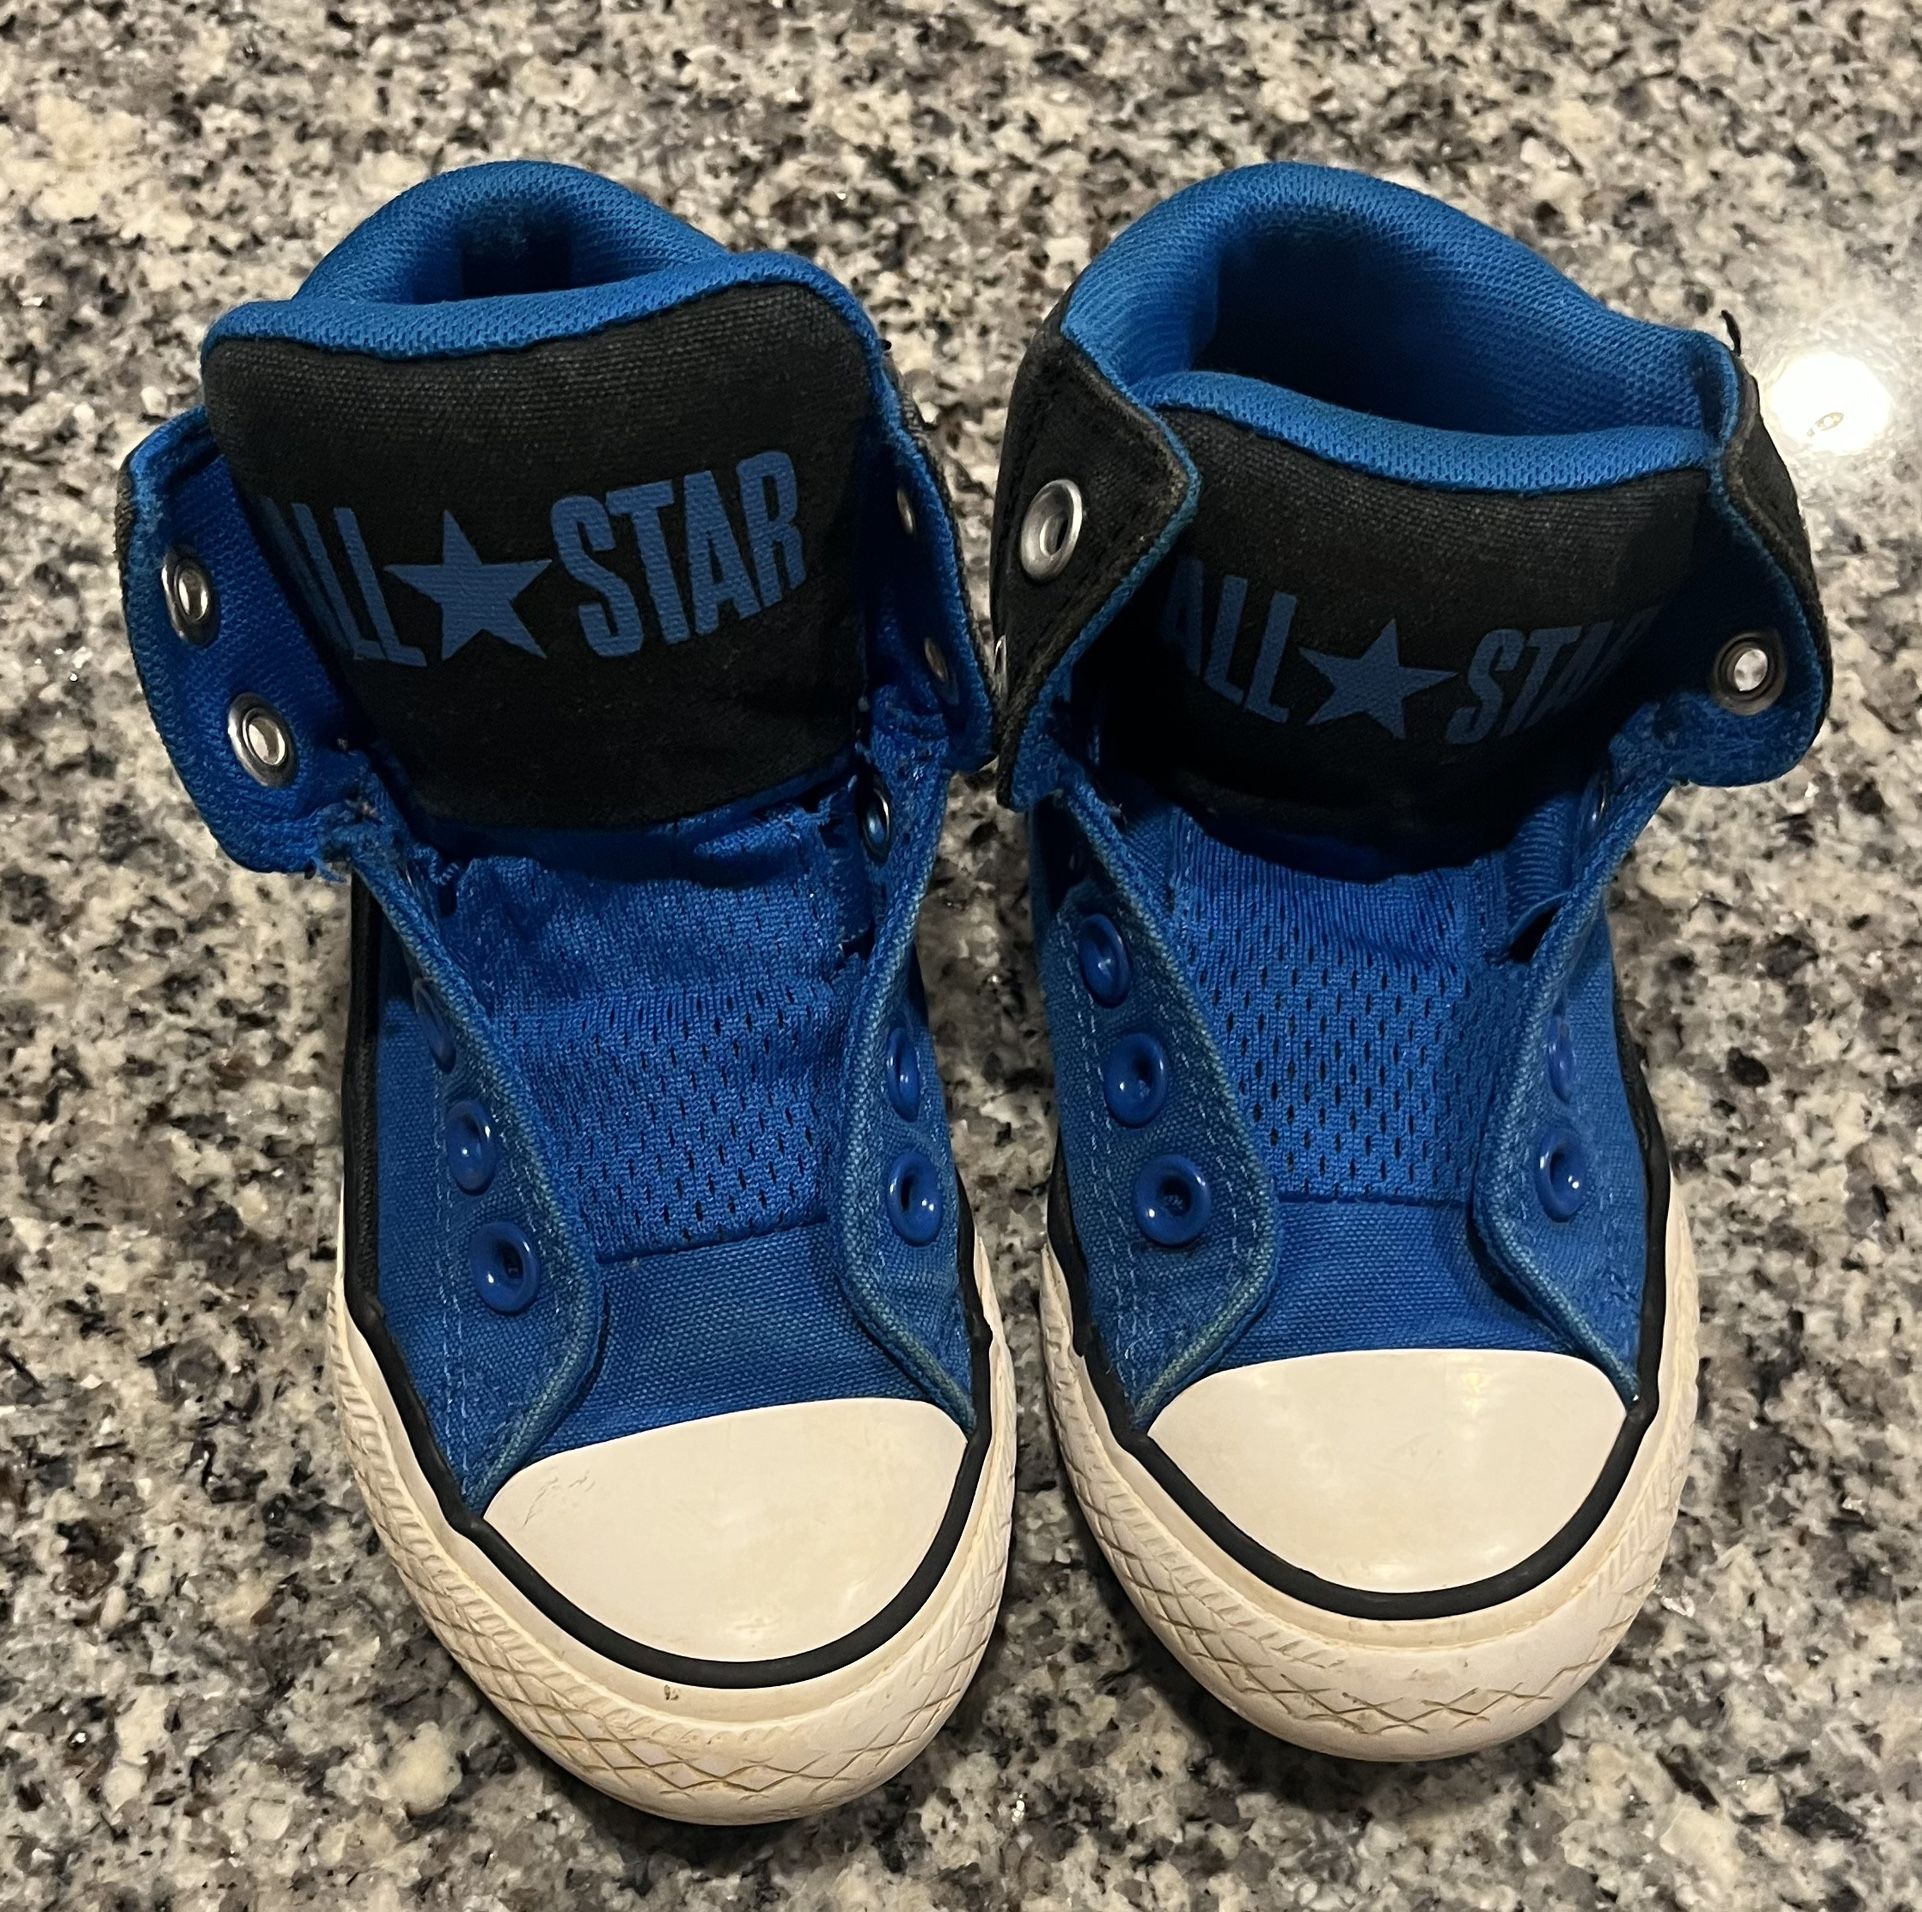 Boys Converse All Star Shoes Junior Size 12